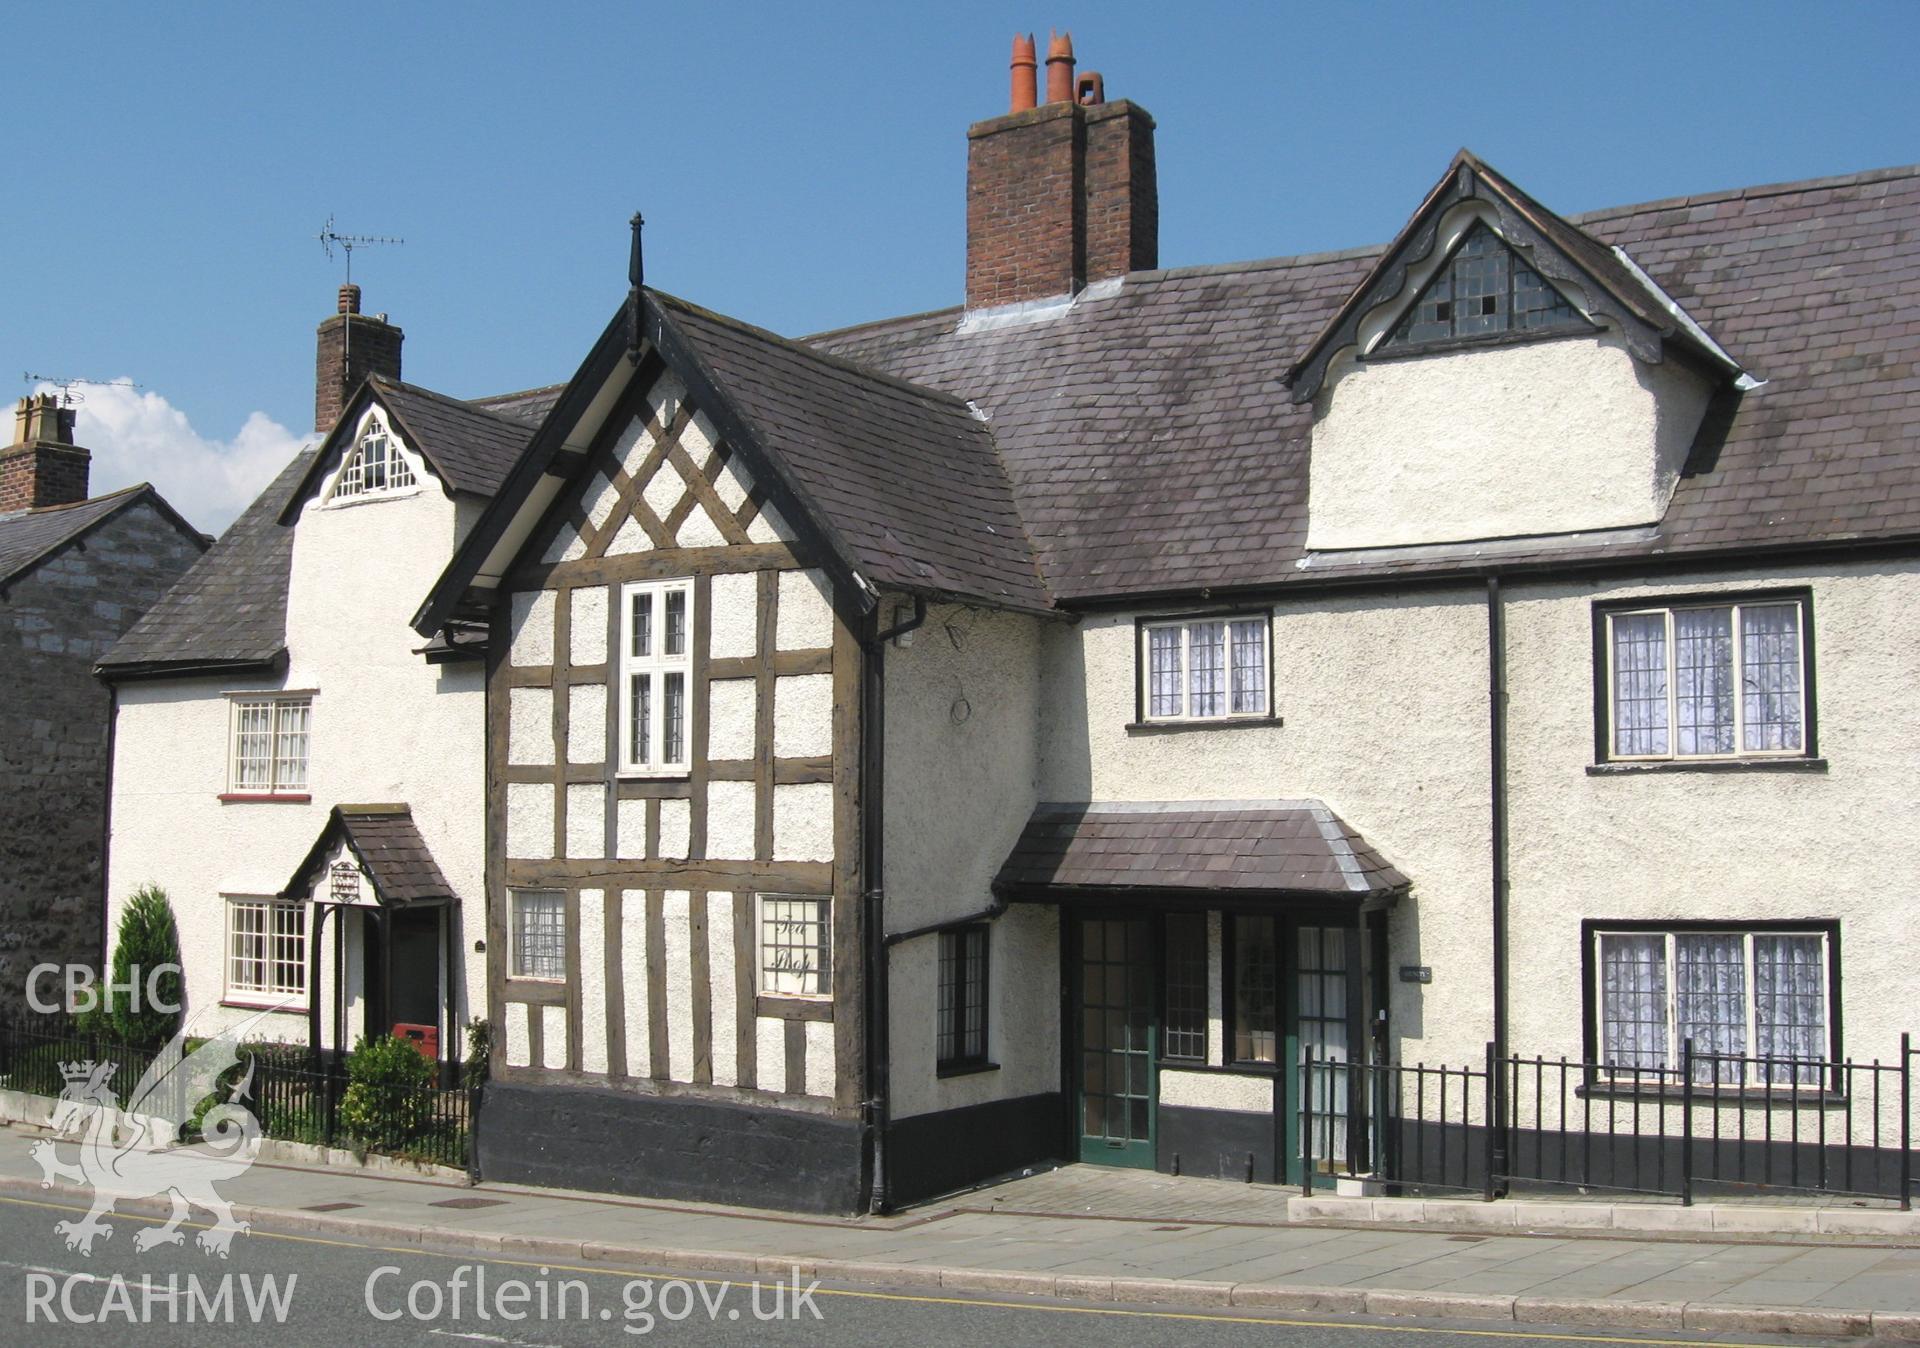 Colour photo showing Clwyd Bank Academy, Ruthin, taken by Paul R. Davis and dated 11th May 2006.